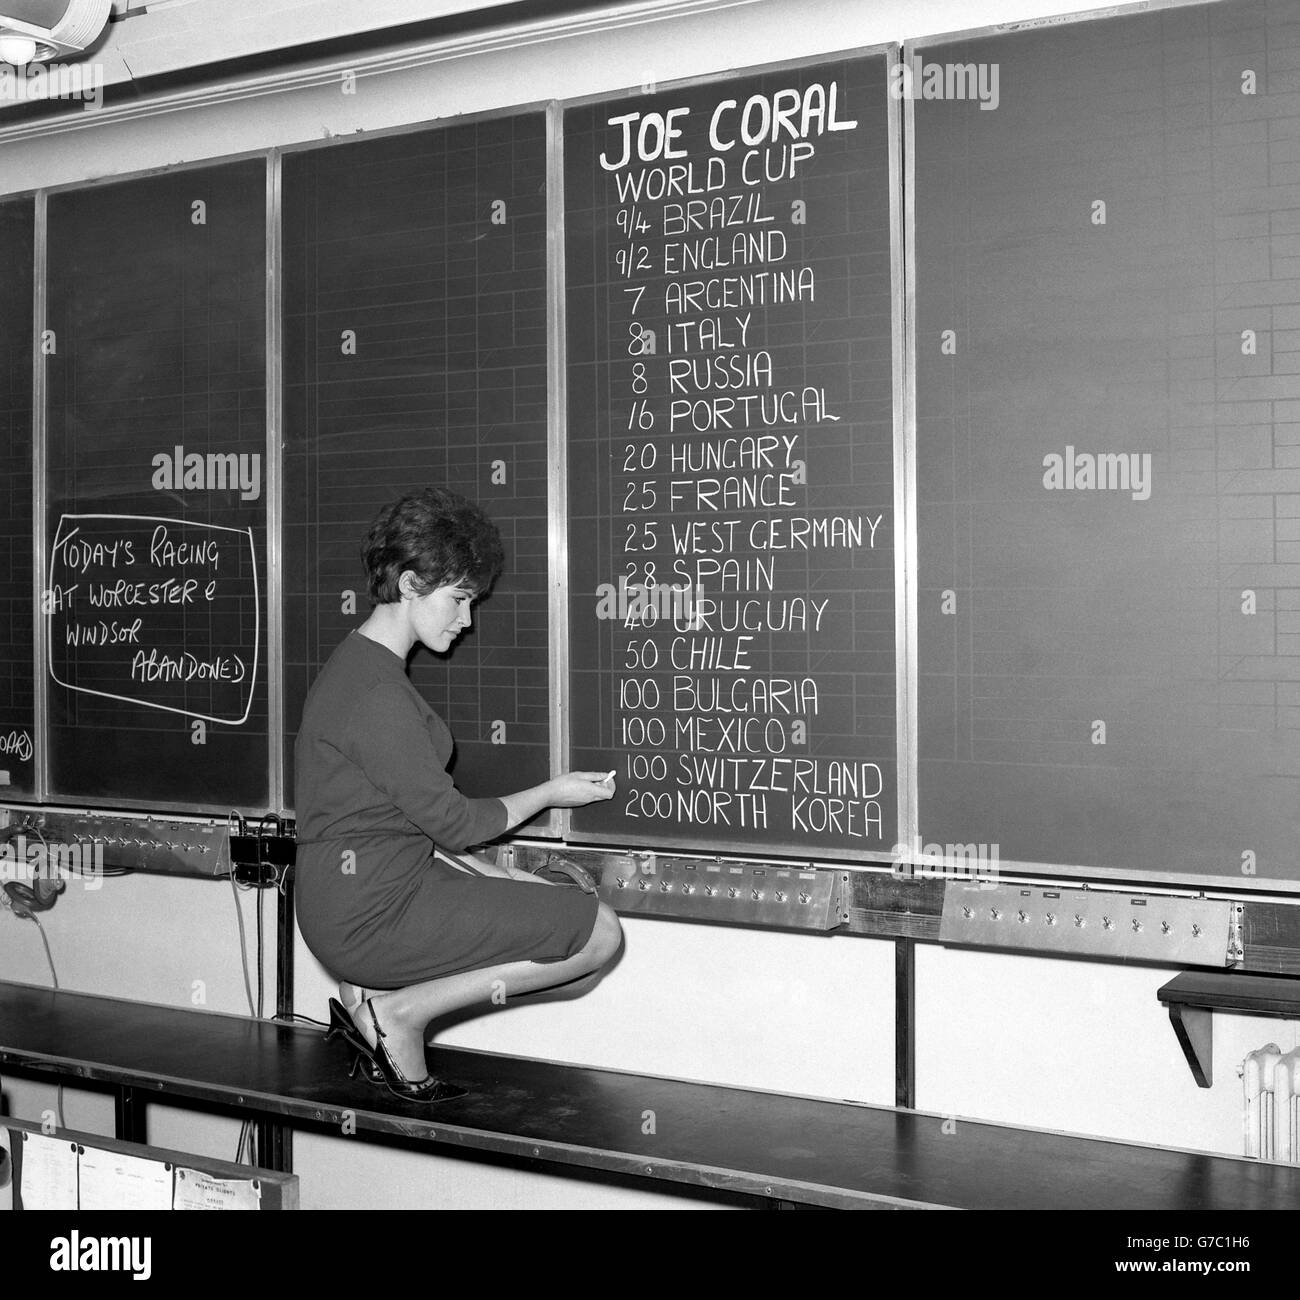 Soccer - World Cup 1966 - Joe Coral Betting Odds - Regent Street, London. A member of staff writes the betting odds on a board at Joe Coral Ltd on Regent Street in London. Stock Photo